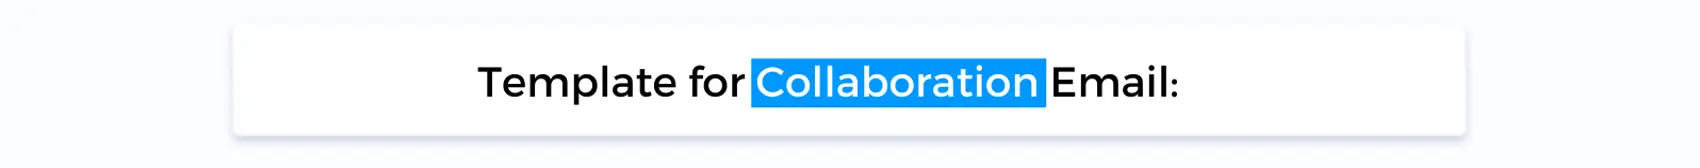 Template for Collaboration Email: